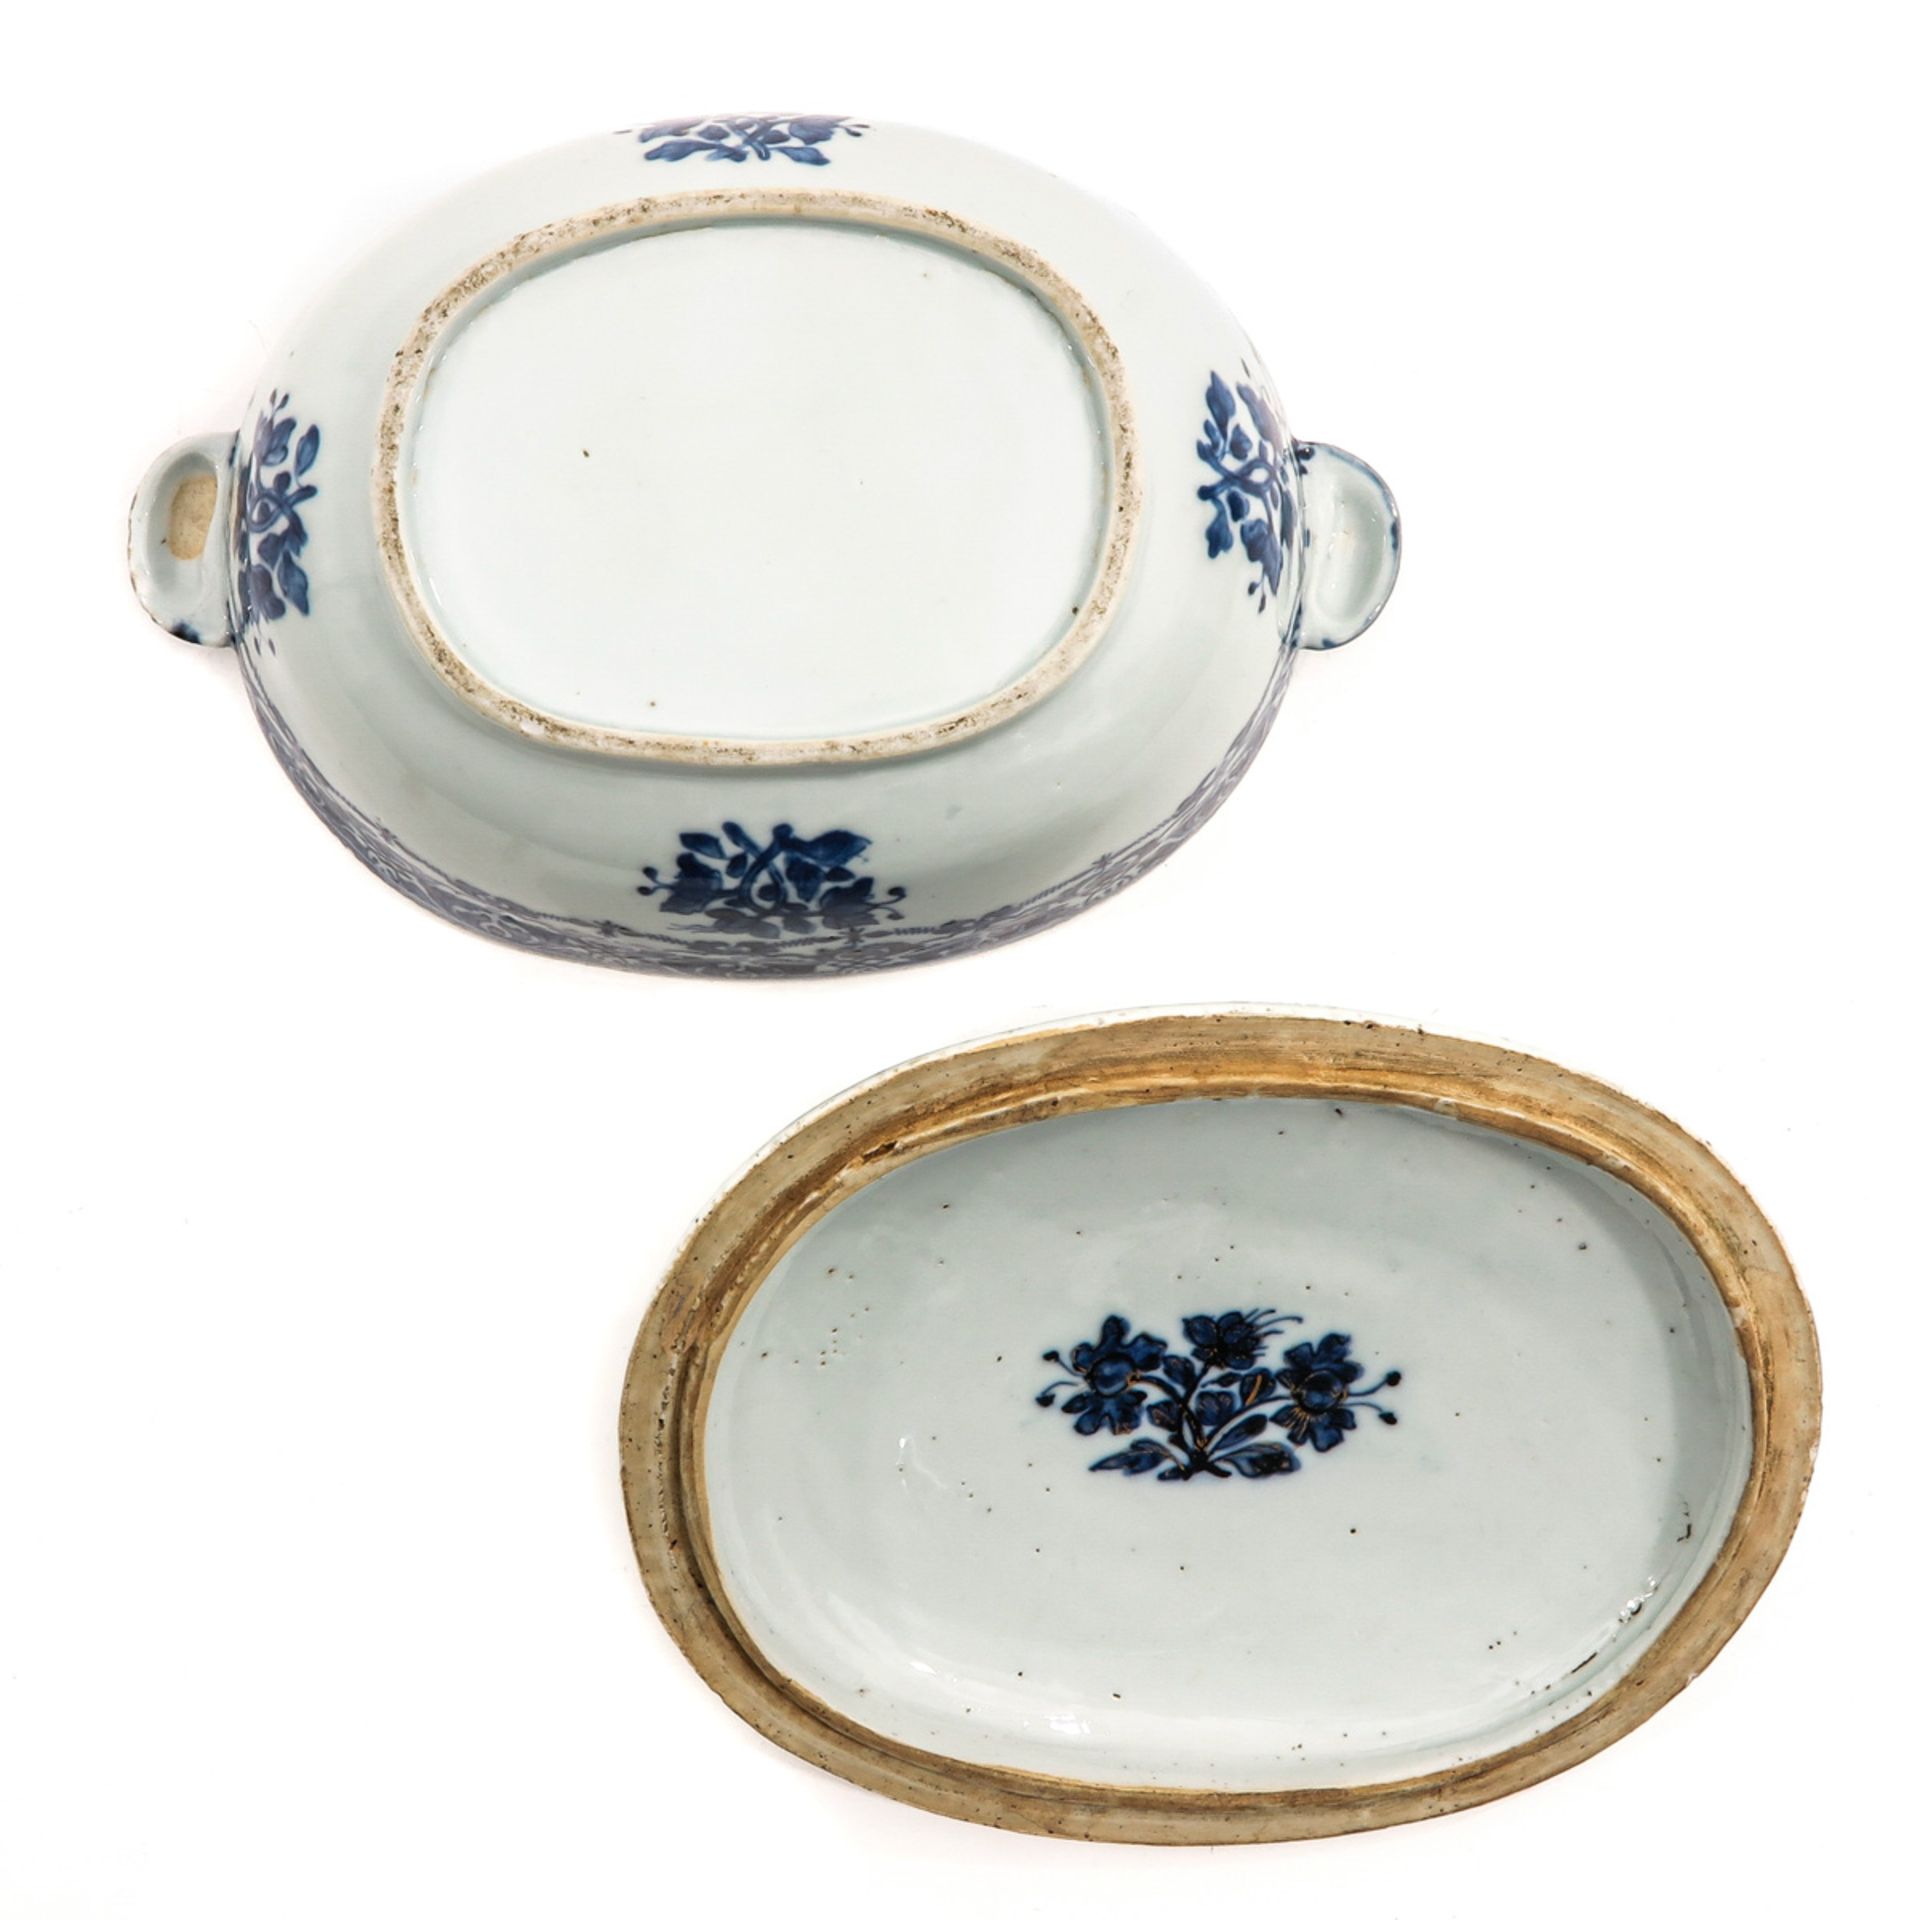 An Oval Tureen with Cover - Image 6 of 10